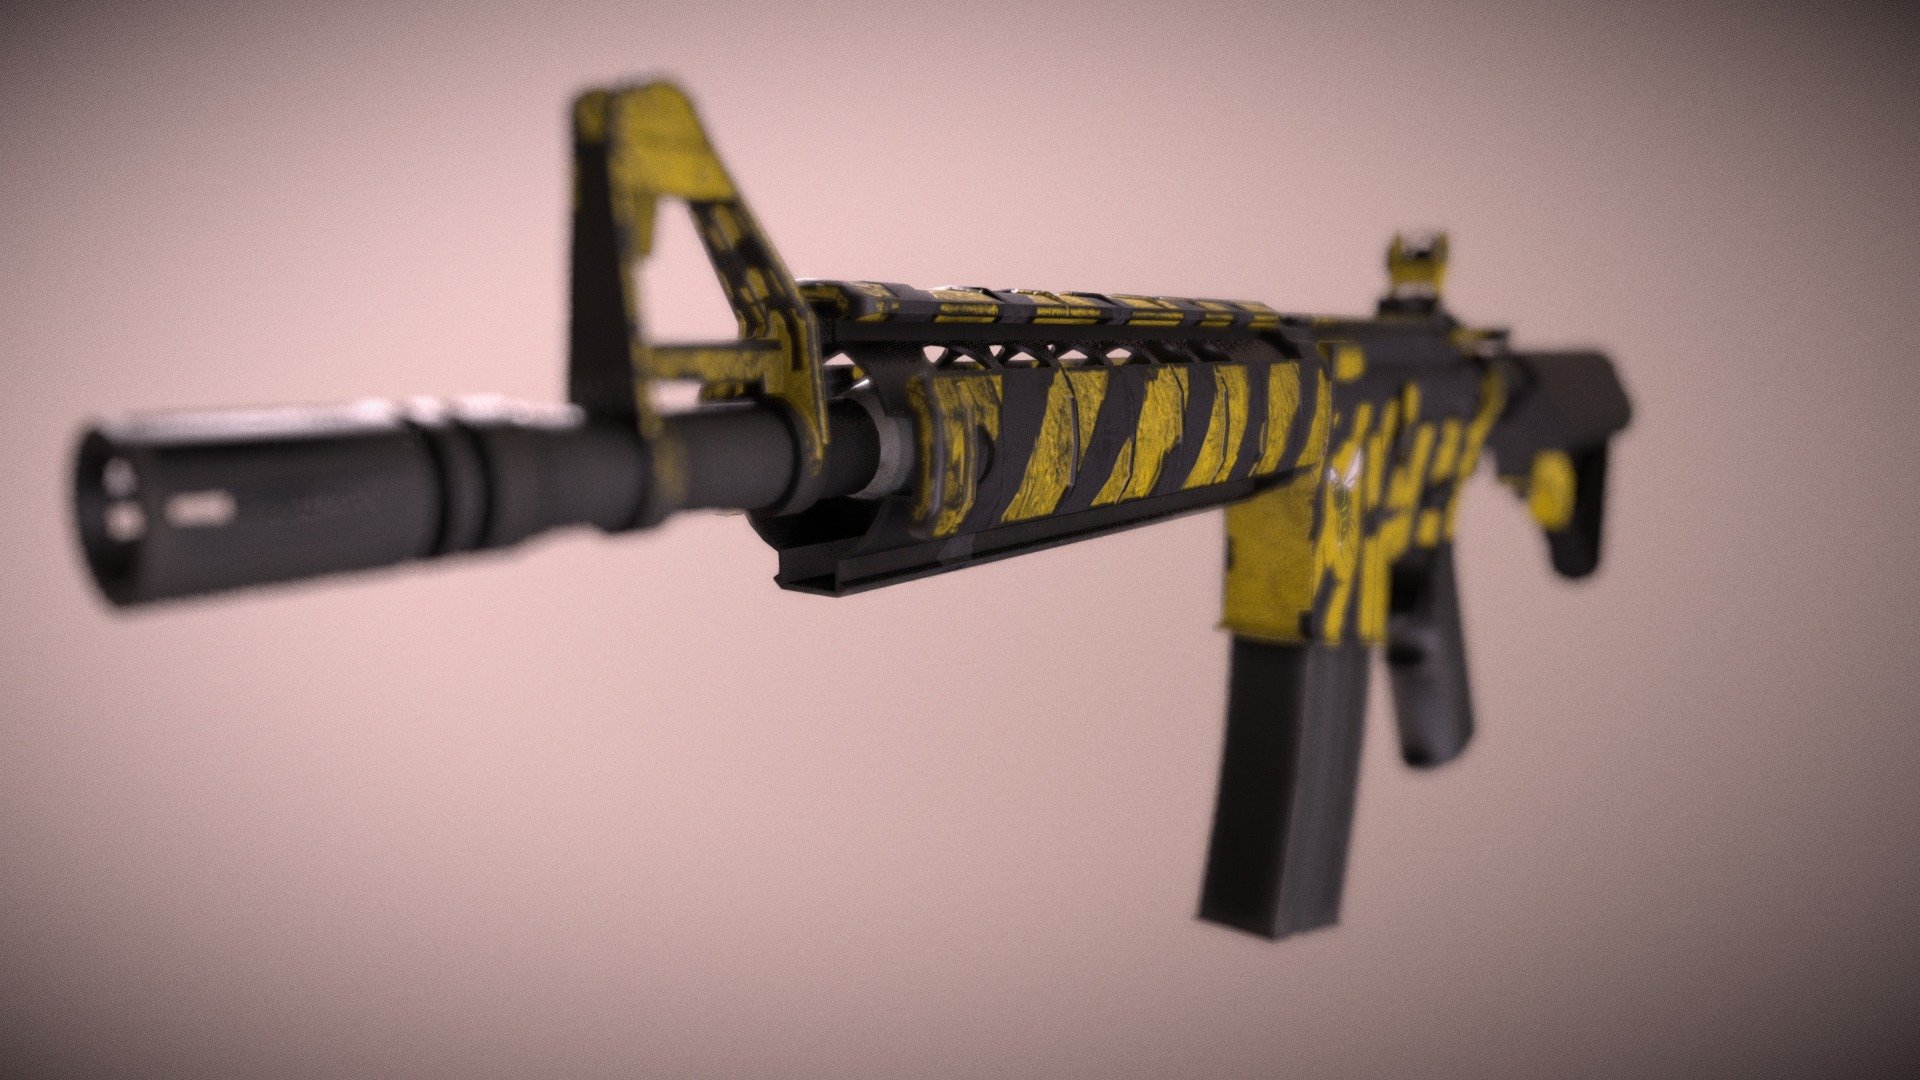 Valve. Why u no let me use workbench? This skin is quite nice in my opinion. It was handpainted through and through to differentiate it from the other sci-fi bullshittery in CSGO already. This was the first skin I made for CSGO. The first draft was in photoshop, which I then redid in Substance Painter. Which is the design you are viewing now. I like to think some bored artisic CT was sitting in his bed messing around with his gun when he realised he thinks hornets look sp00ky. Then raiding some paint supplies and pimping out his gun girlfriend. I know that the &ldquo;yellowjacket